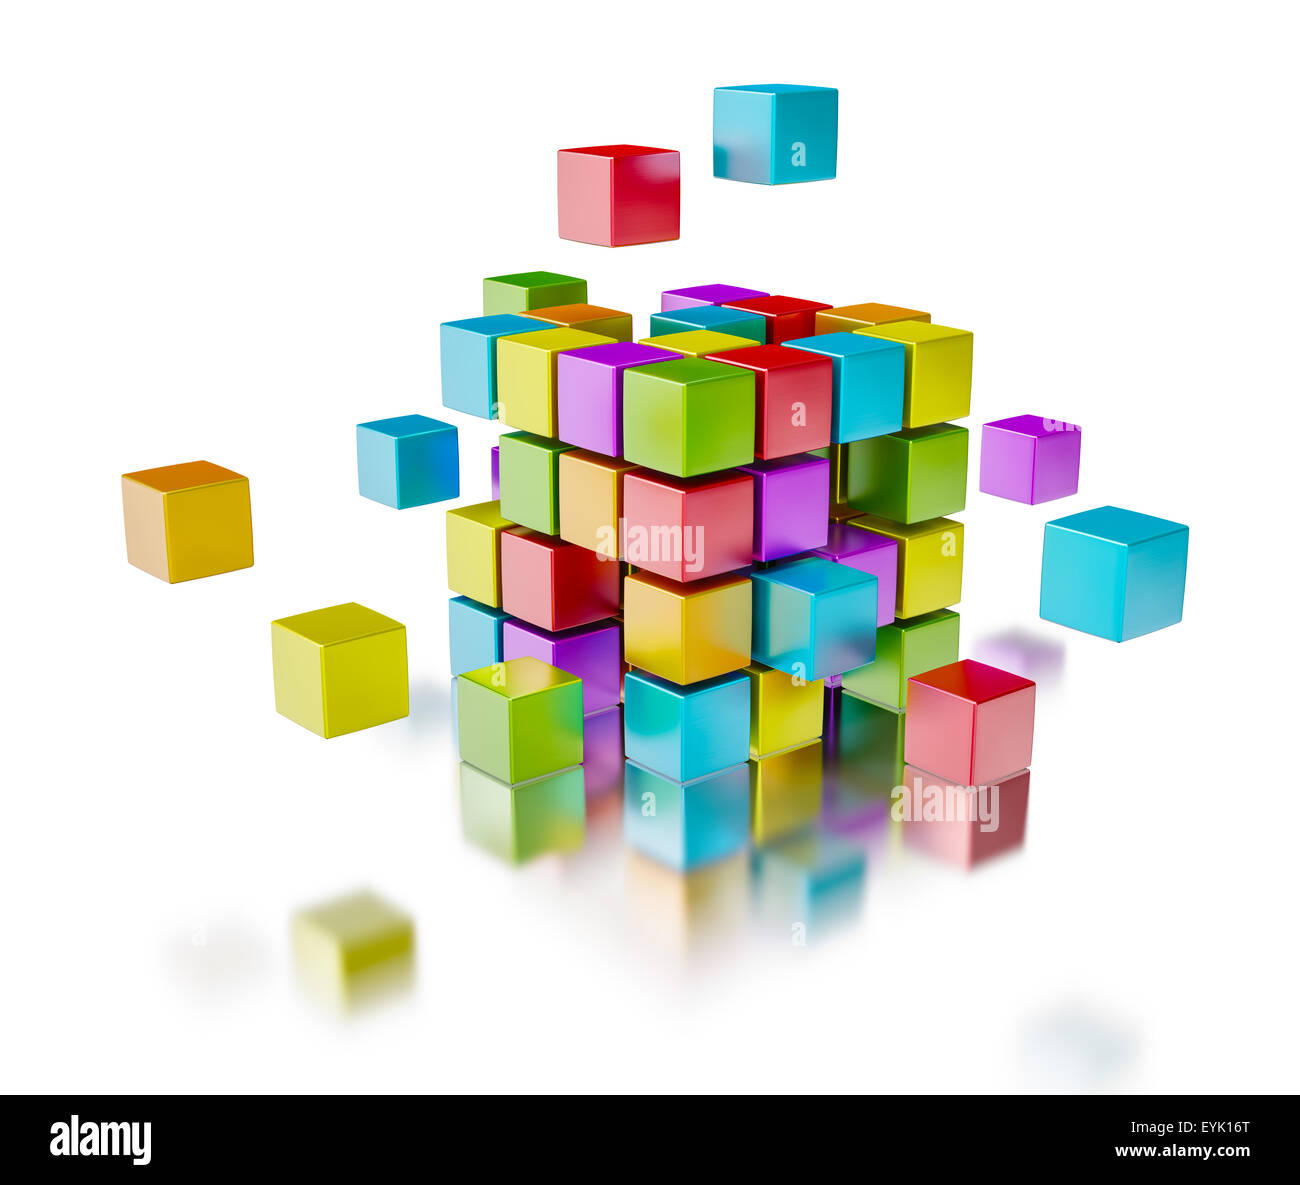 Business team teamwork collaboration concept - colorful color cubes assembling into  cubic structure isolated on white Stock Photo